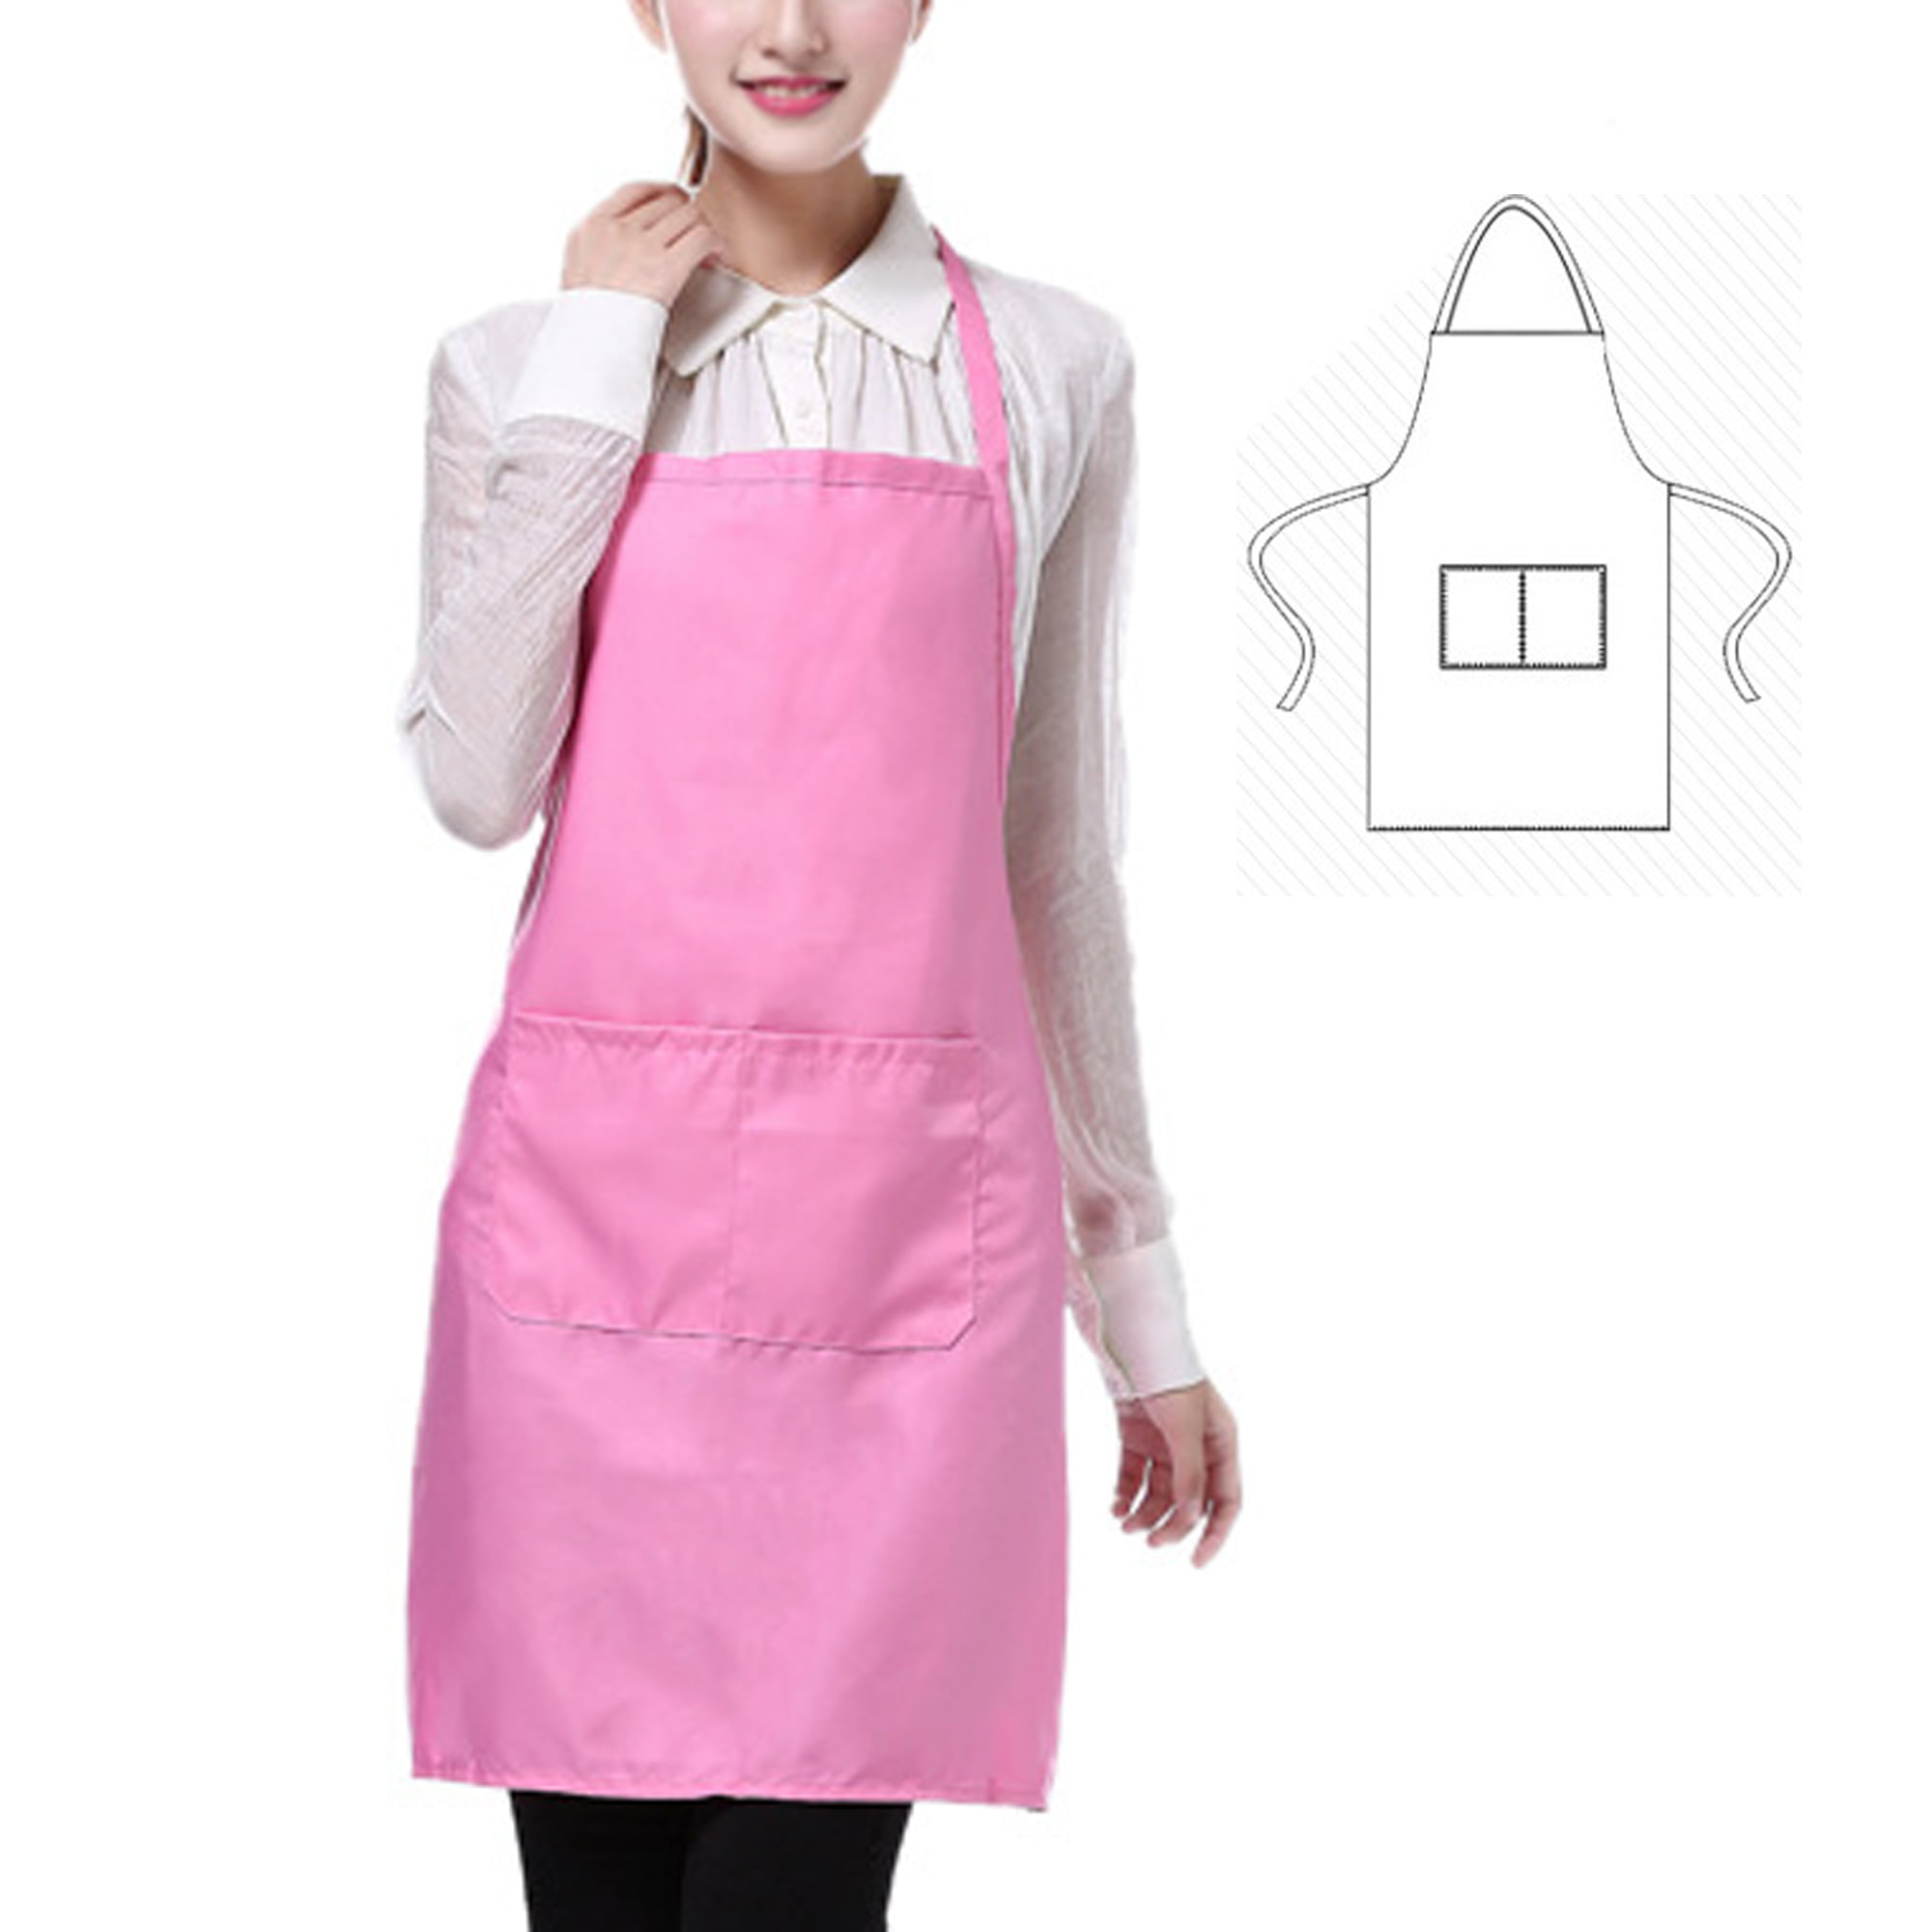 Chef Apron For Cooking,Baking,Crafting,Gardening And BBQ Novelty Binary Code Kitchen Chef Apron With Big Pockets